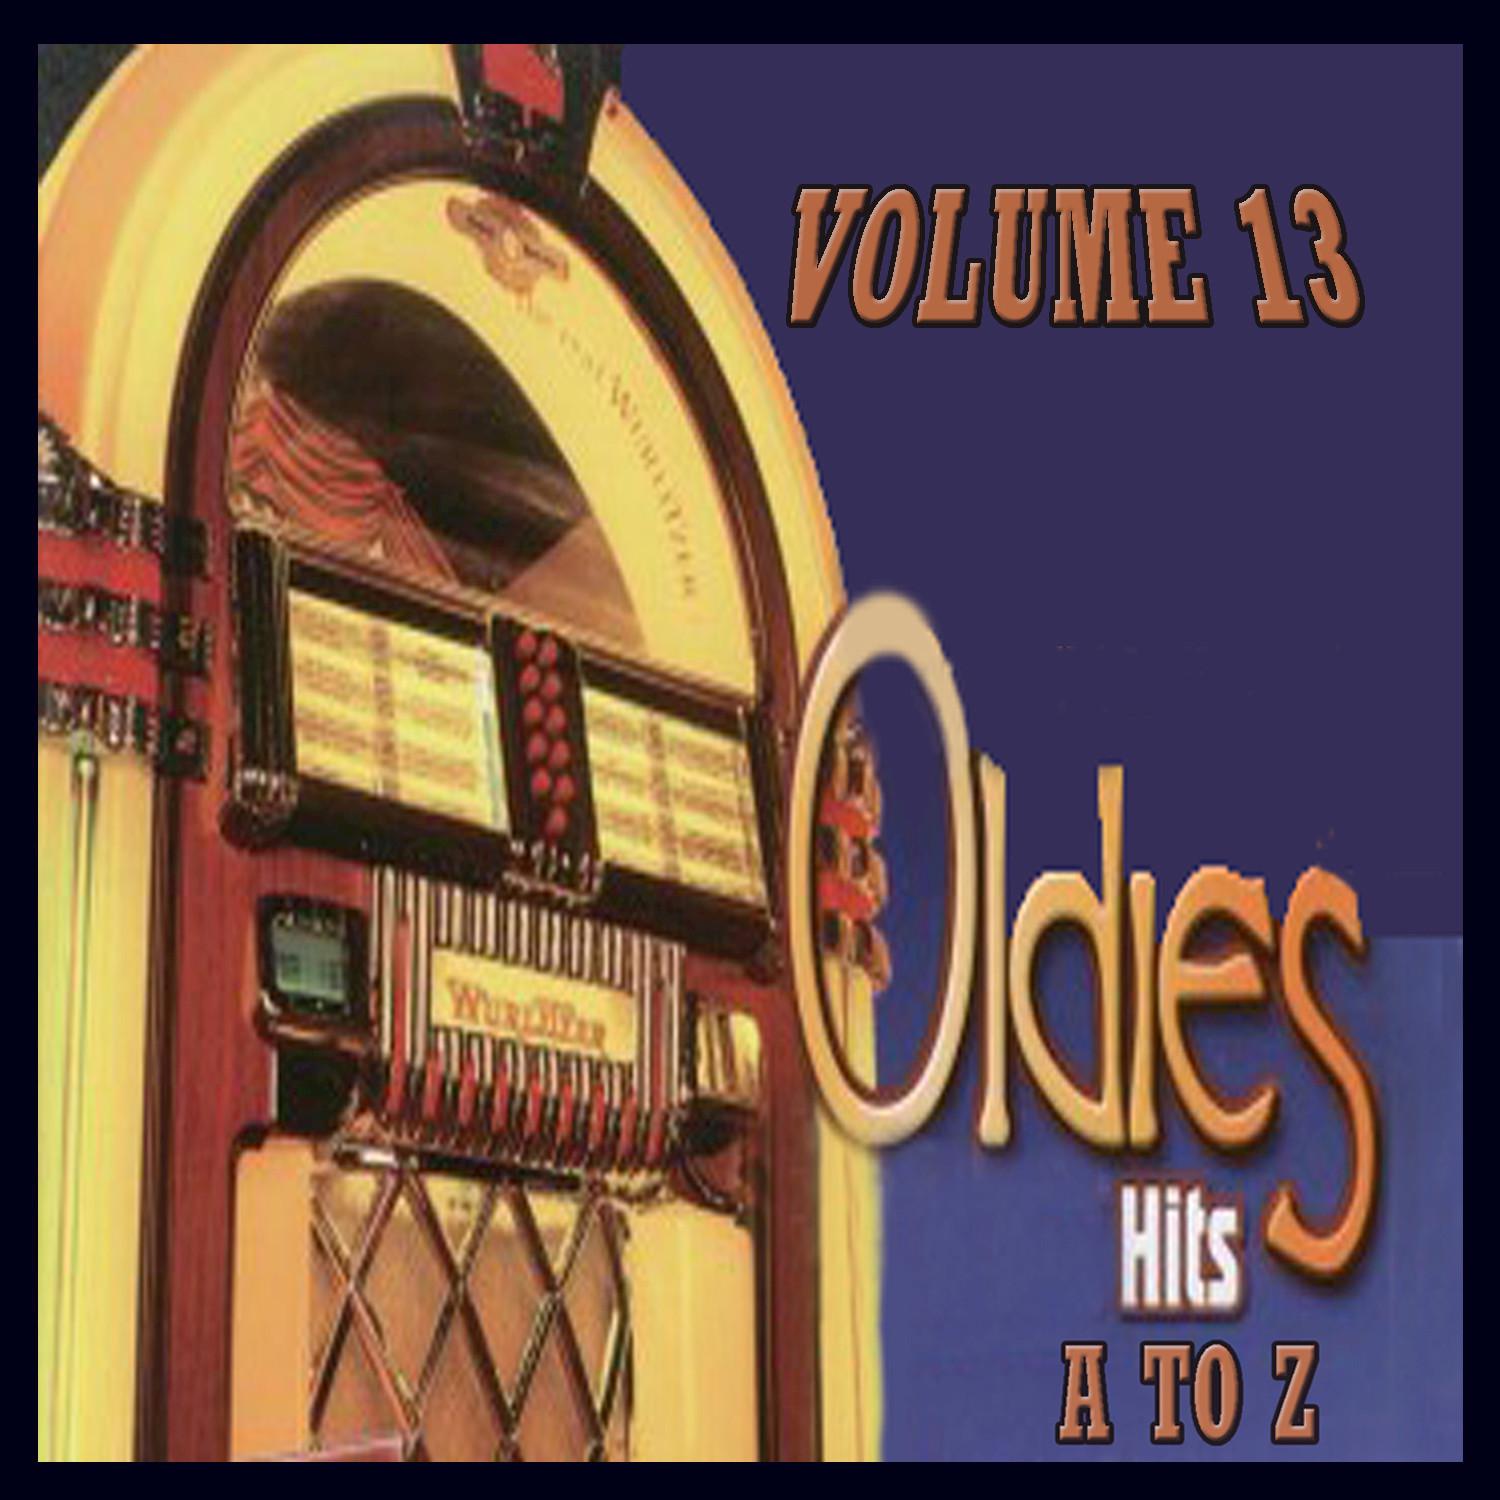 Oldies Hits A to Z - Vol. 13